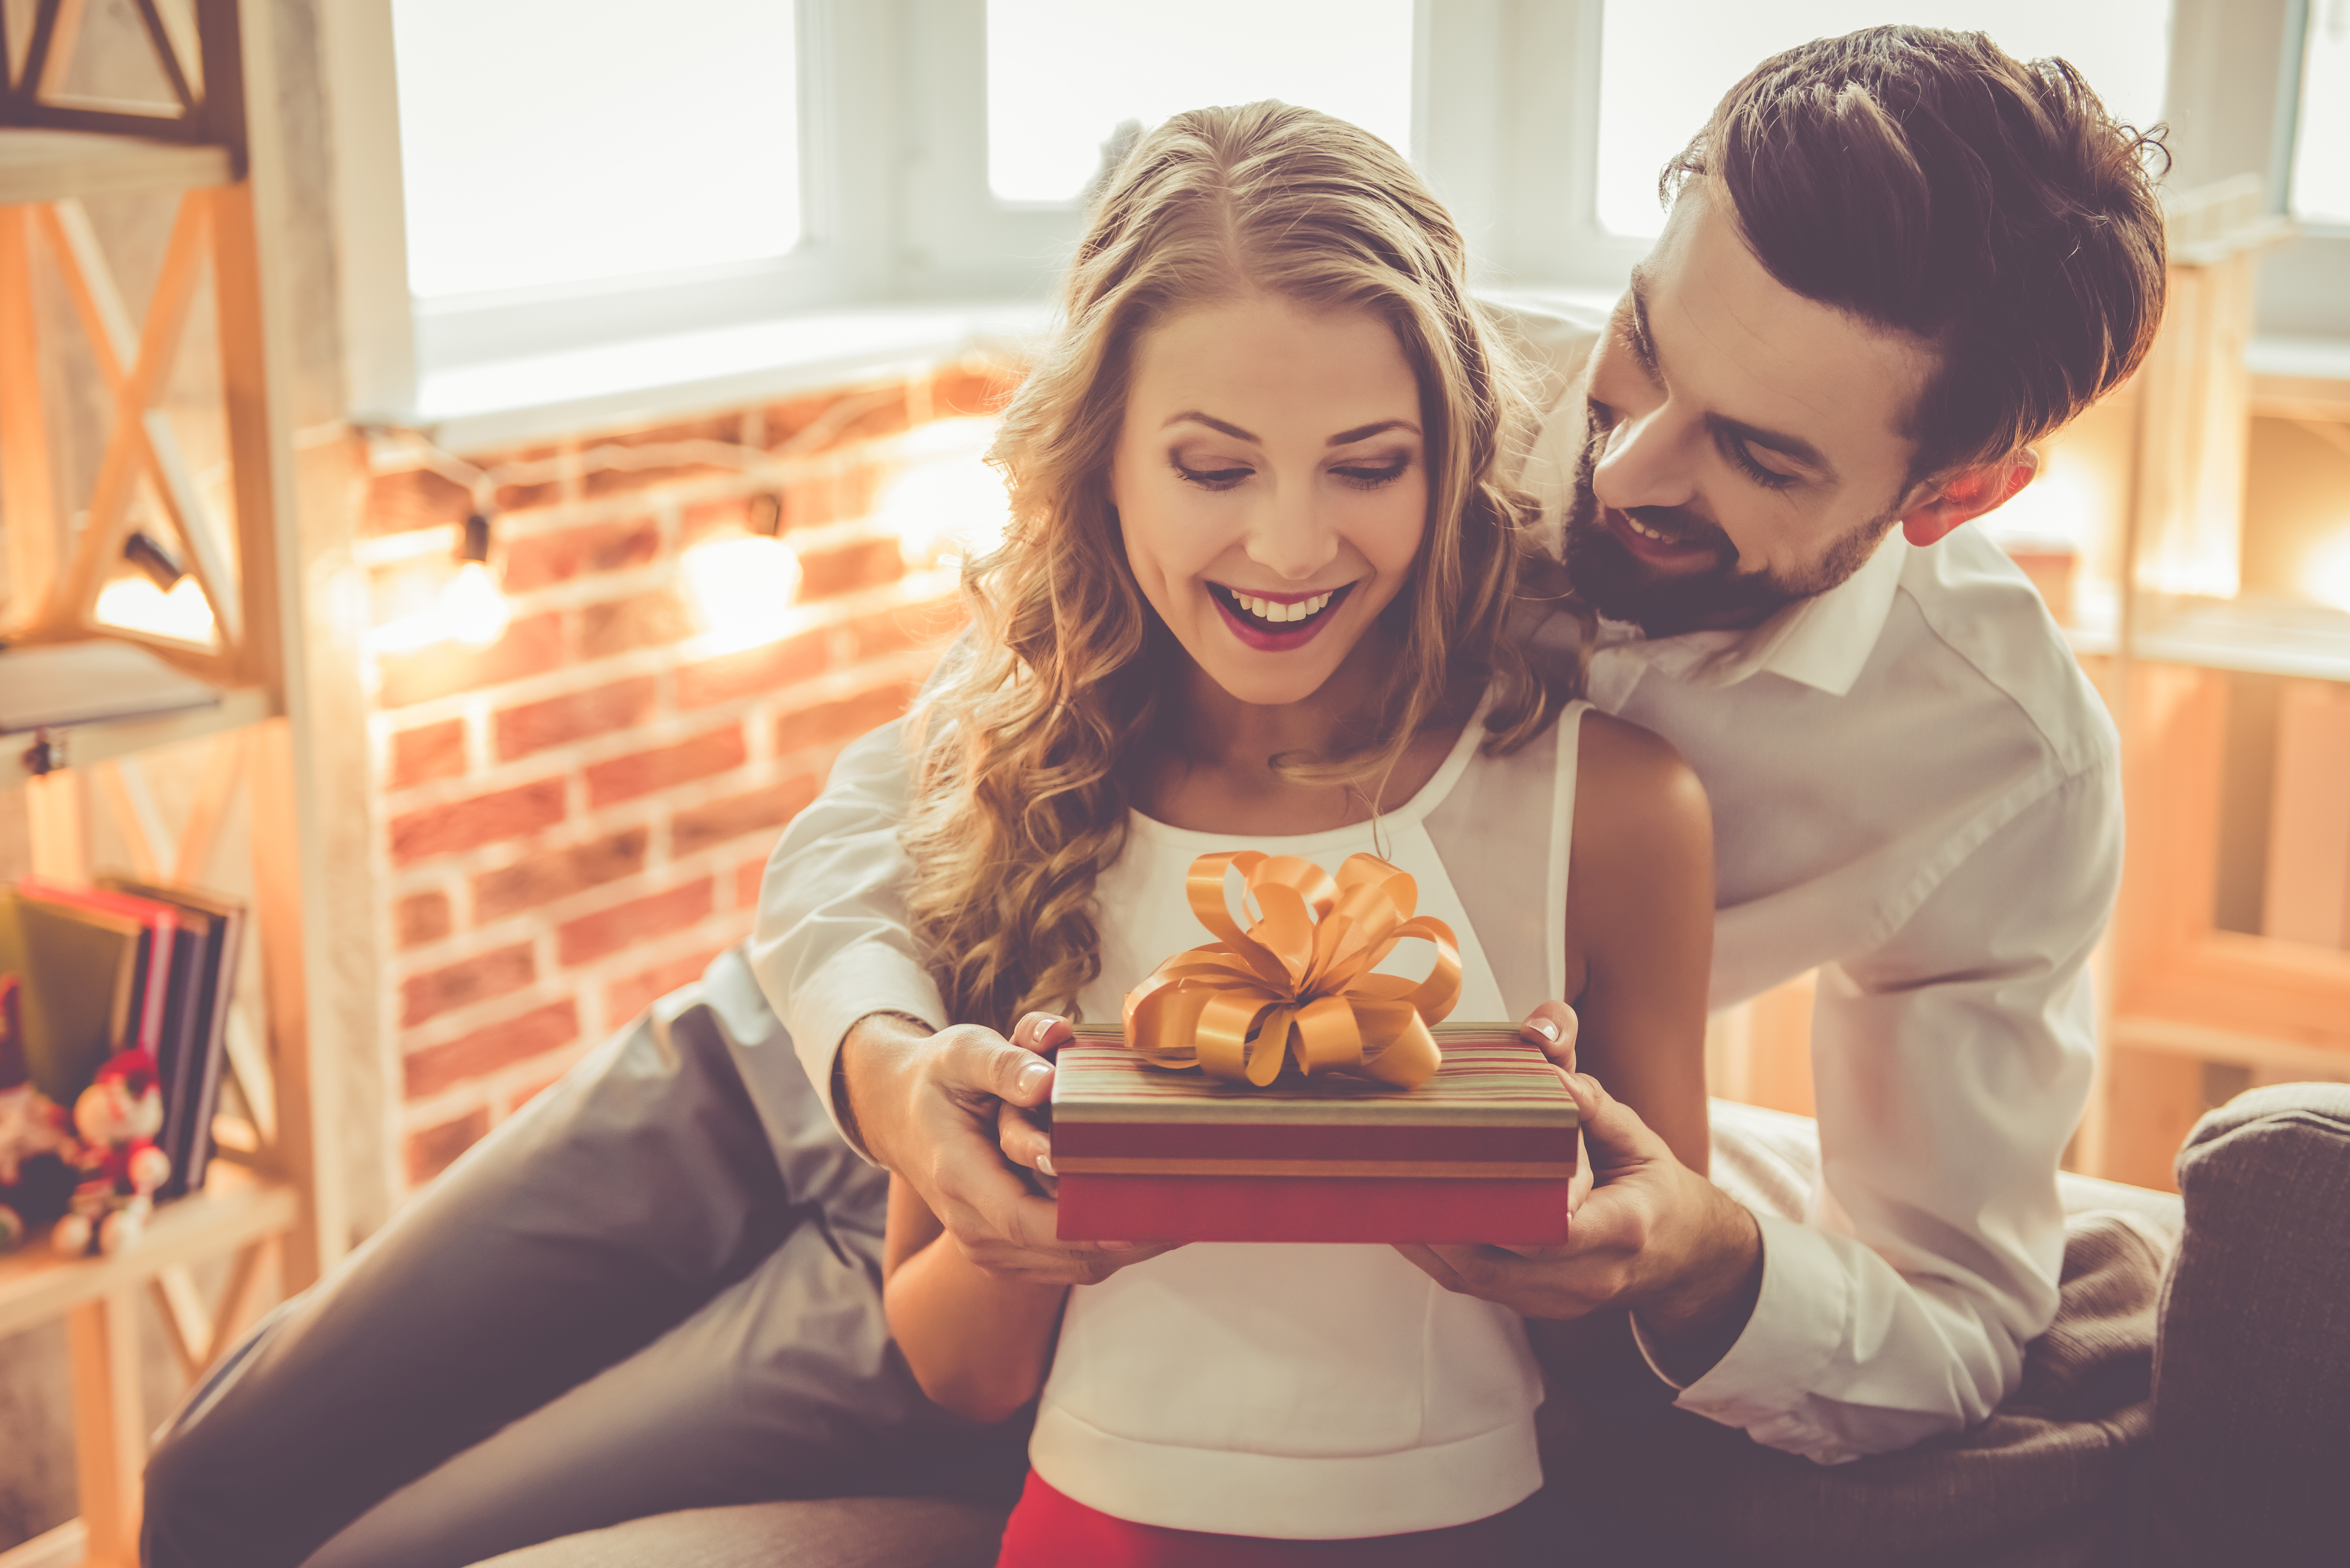 A young man giving his girlfriend a gift box | Source: Shutterstock